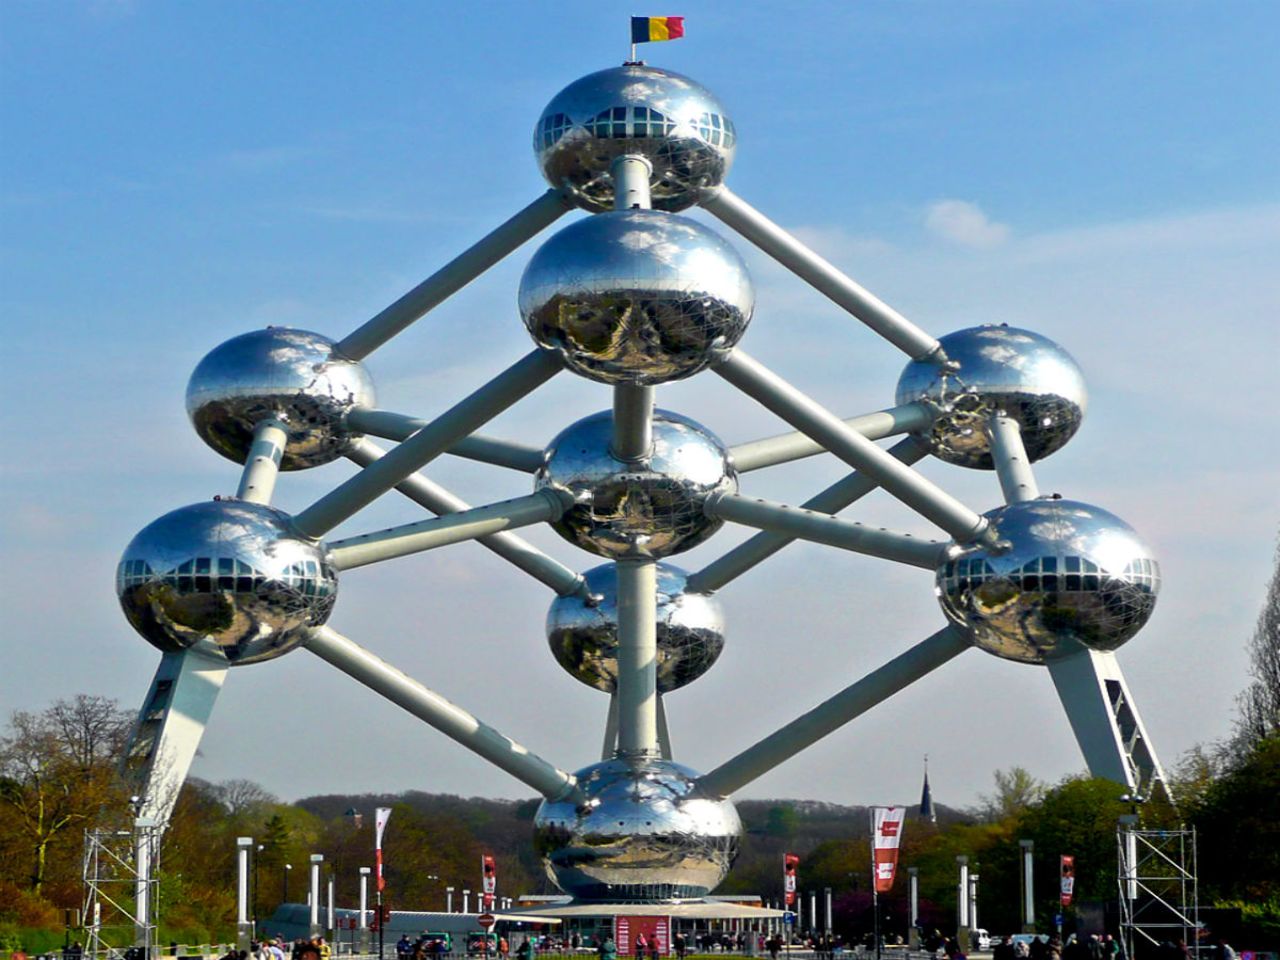 As one of the only remaining symbols of the 1958 Brussels World Fair, this extraordinary structure, conceptualized by late engineer André Waterkeyn, represents an iron crystal magnified 165 billion times. It features nine spheres interconnected by 20 tubes. While three spheres contain either permanent or temporary exhibitions from around the world, it's the highest, at 92 meters (300 feet), that offers a spectacular panoramic view of the city. <br /><br />Capturing visitors' imaginations with its progressive vision of the future, <a href="http://www.atomium.be/" target="_blank" target="_blank">Atomium</a> receives an average of 600,000 visitors each year.<br /> (Image: Courtesy Atomium © www.atomium.be - SABAM 2012 - Frankinho)